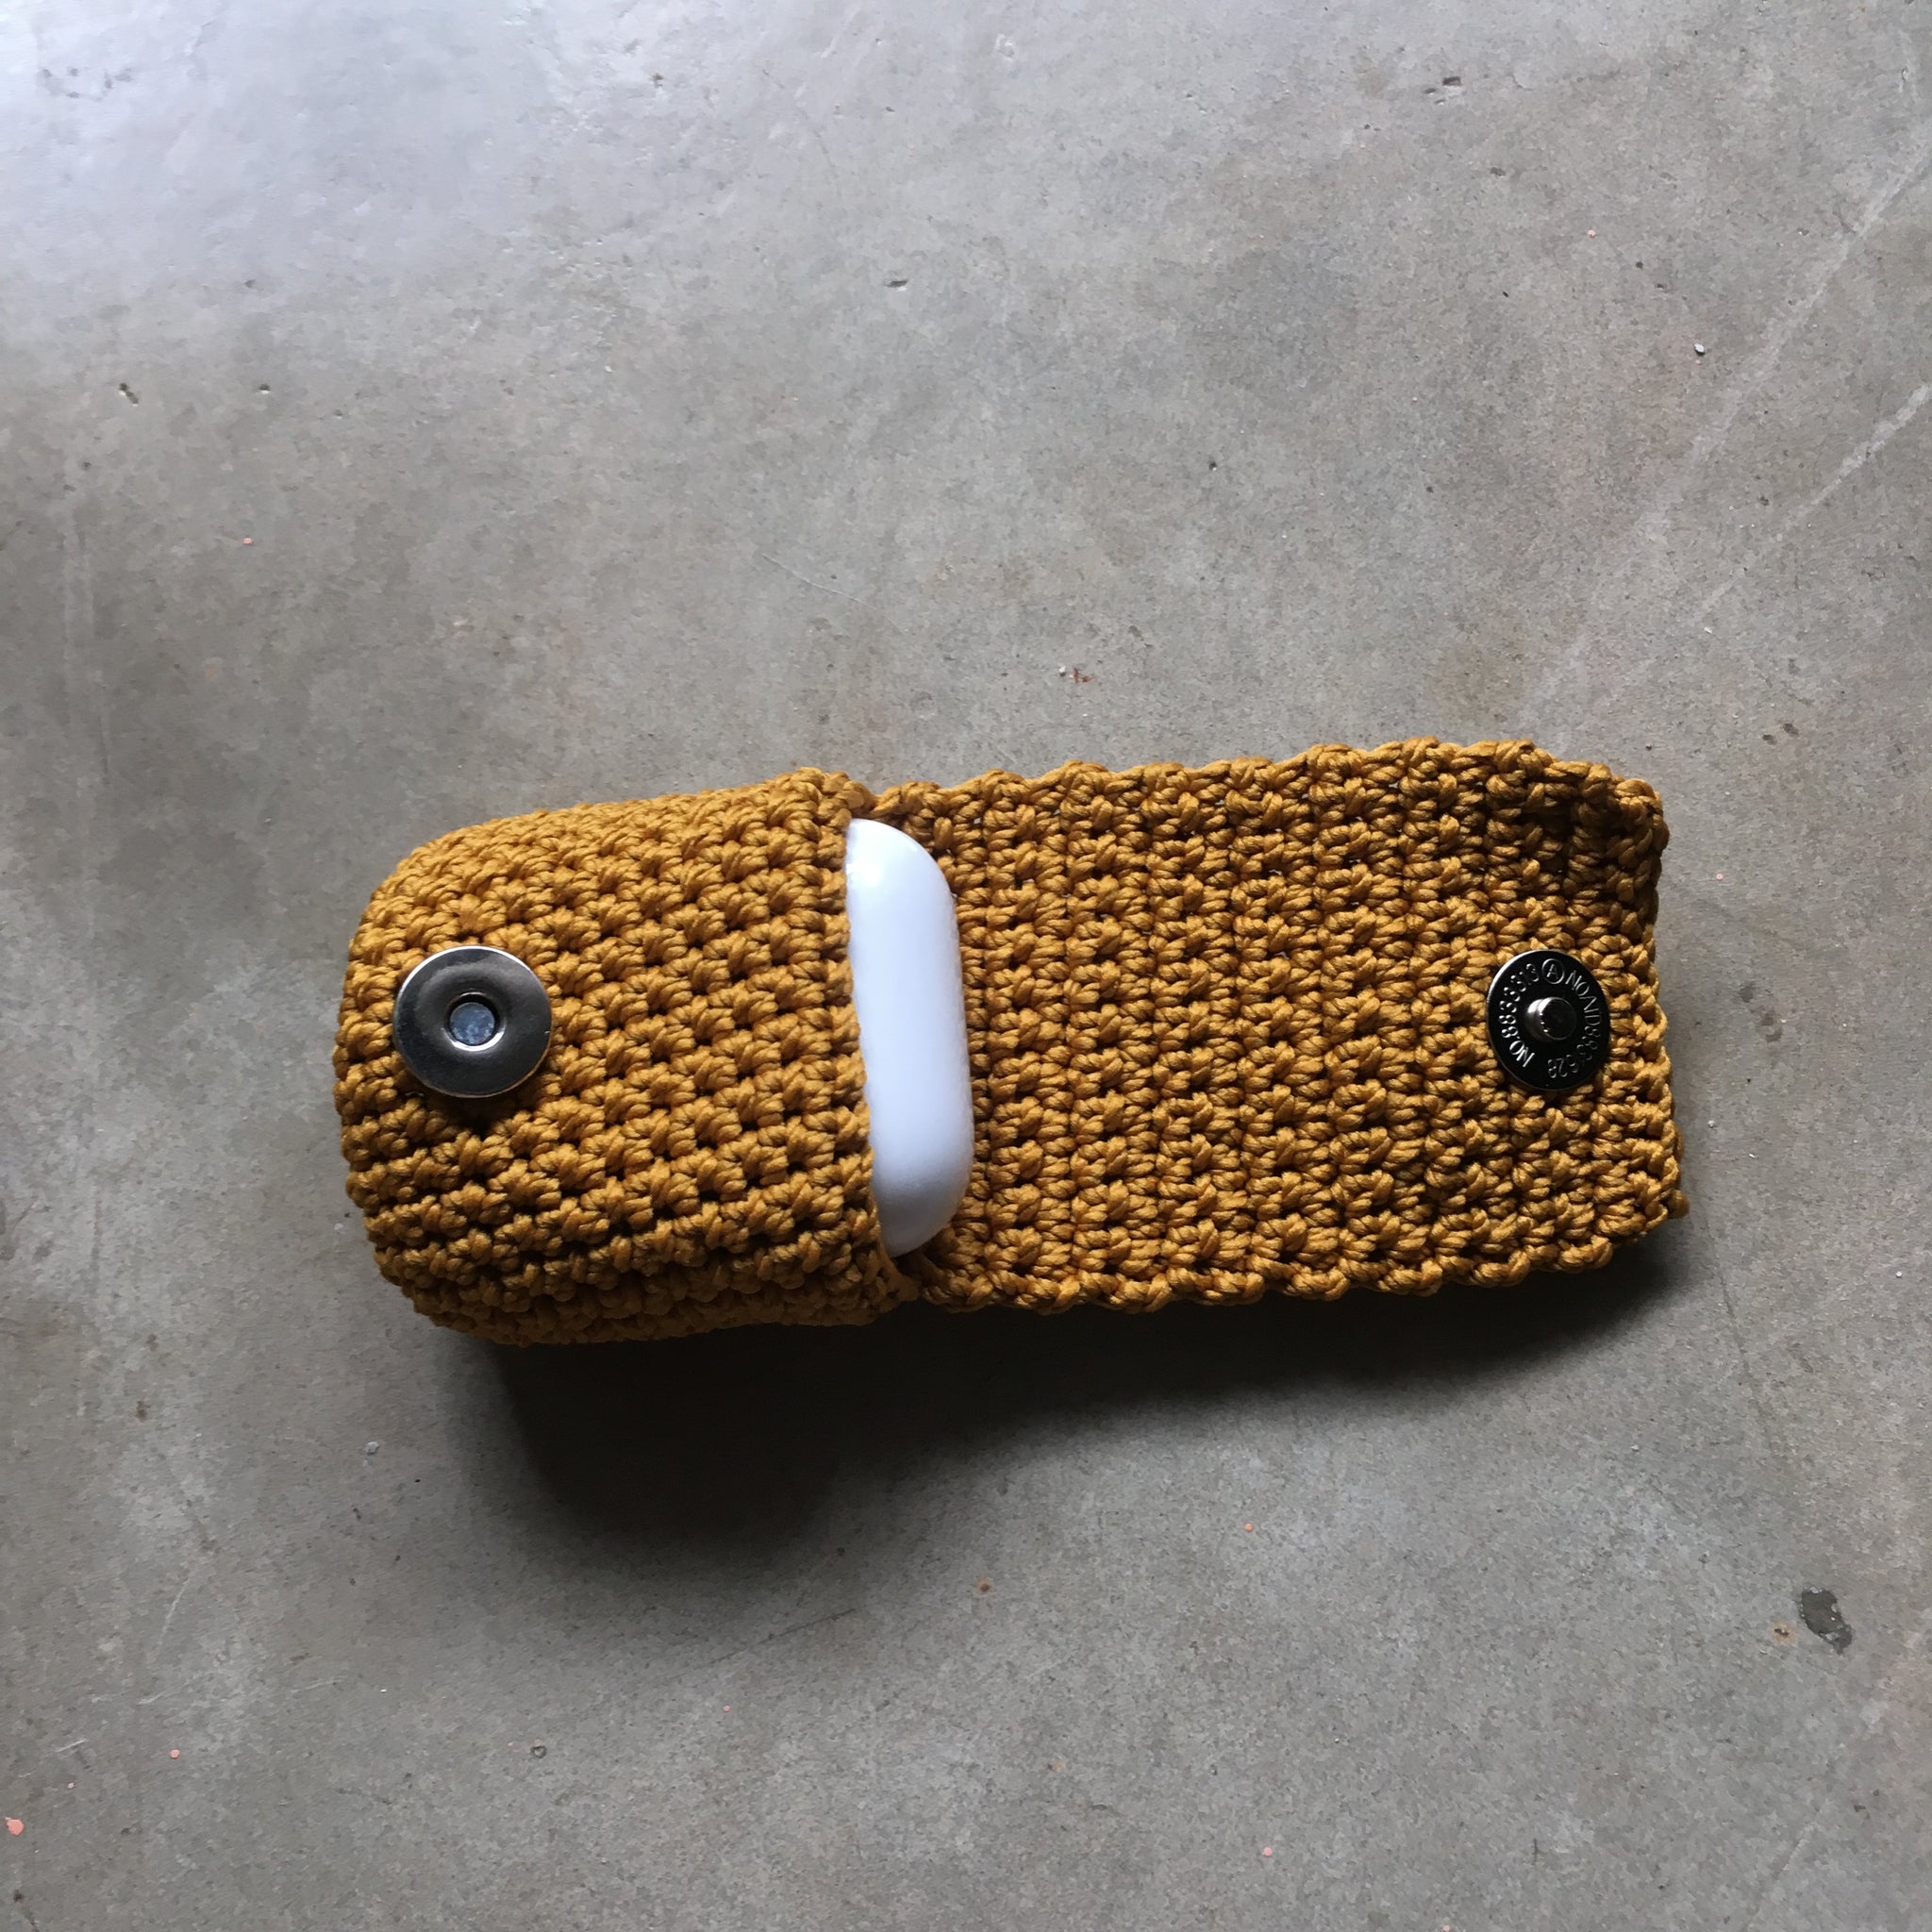 Airpods Case (Mocca)